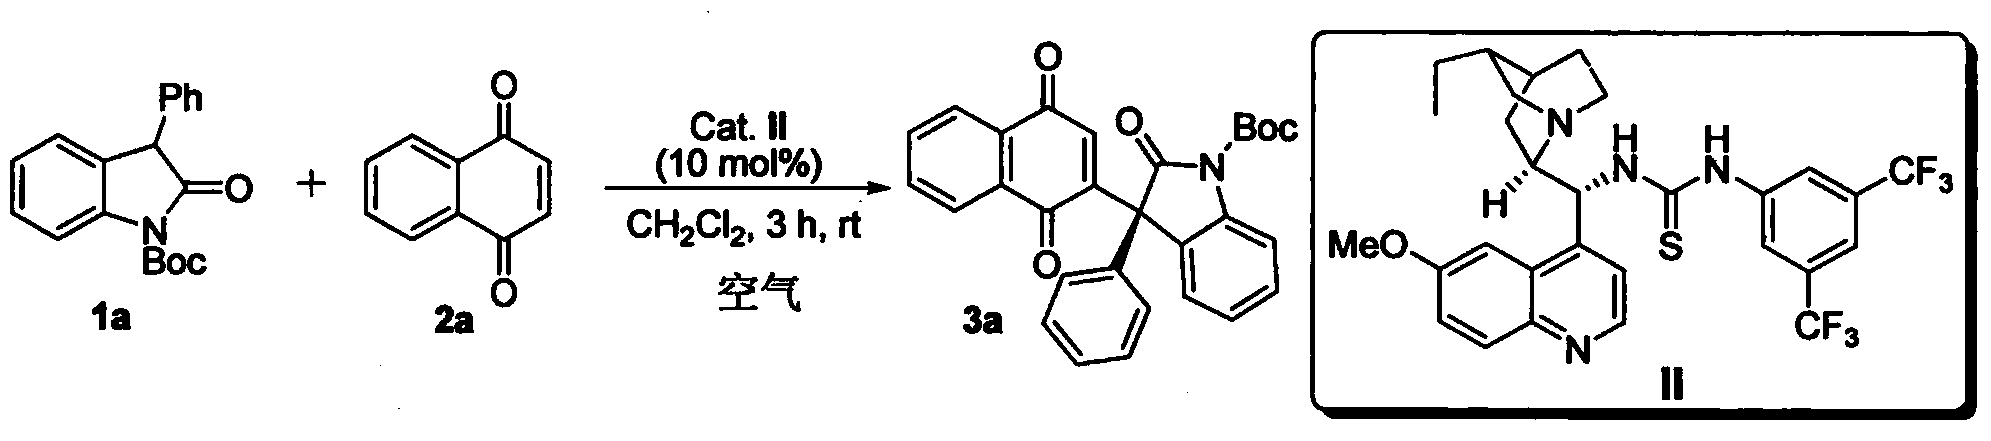 Method for asymmetric synthesis of 3,3-disubstituted-2-oxindole compound